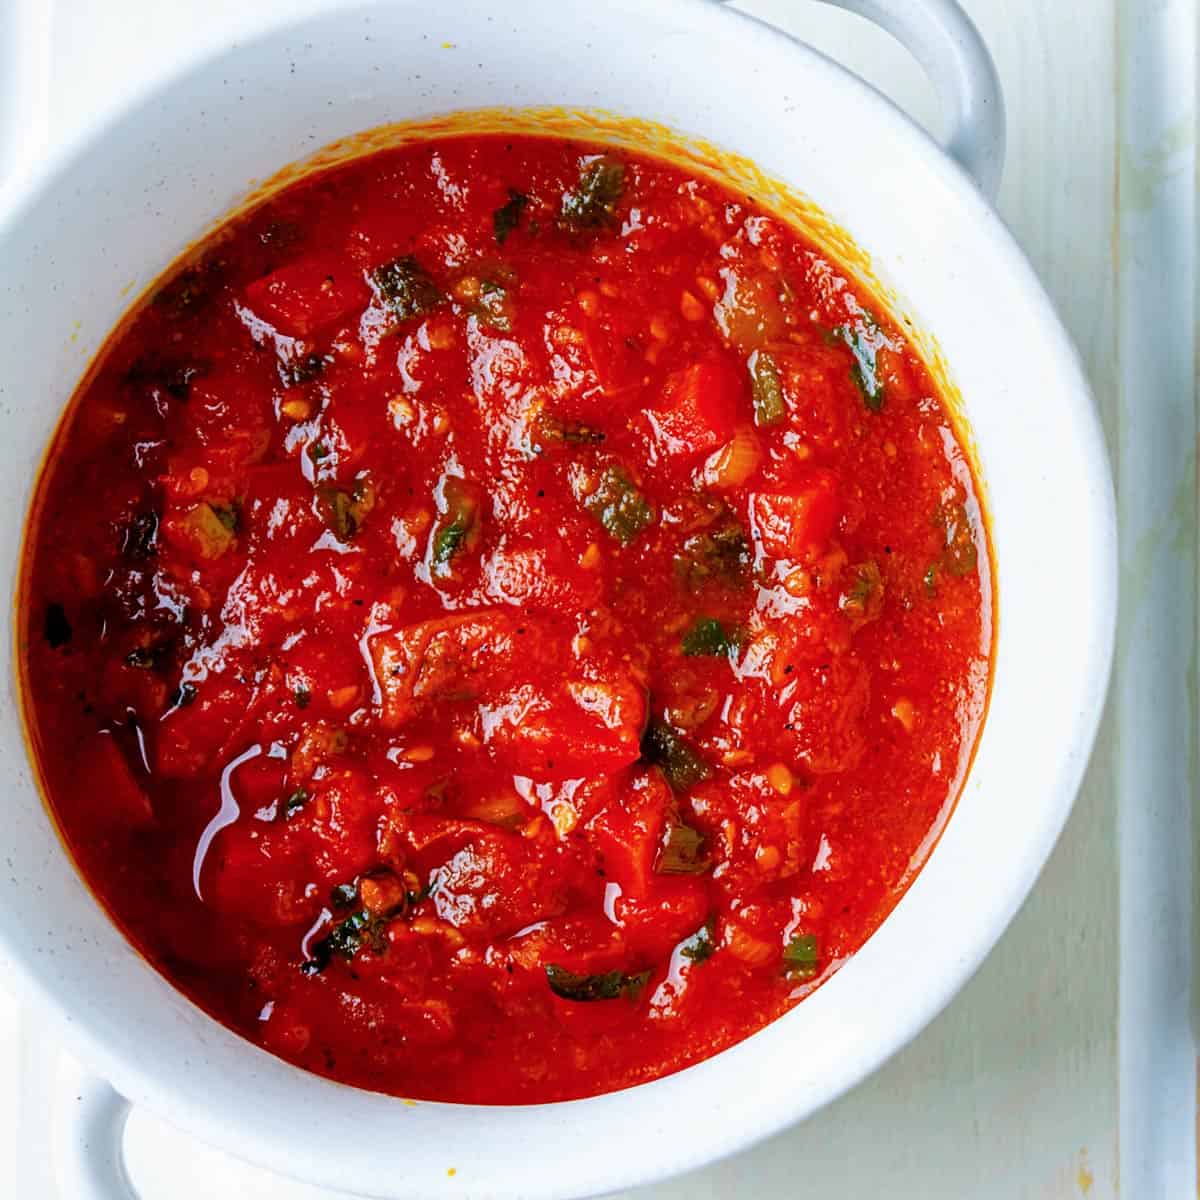 Hogao tomato sauce in a bowl.